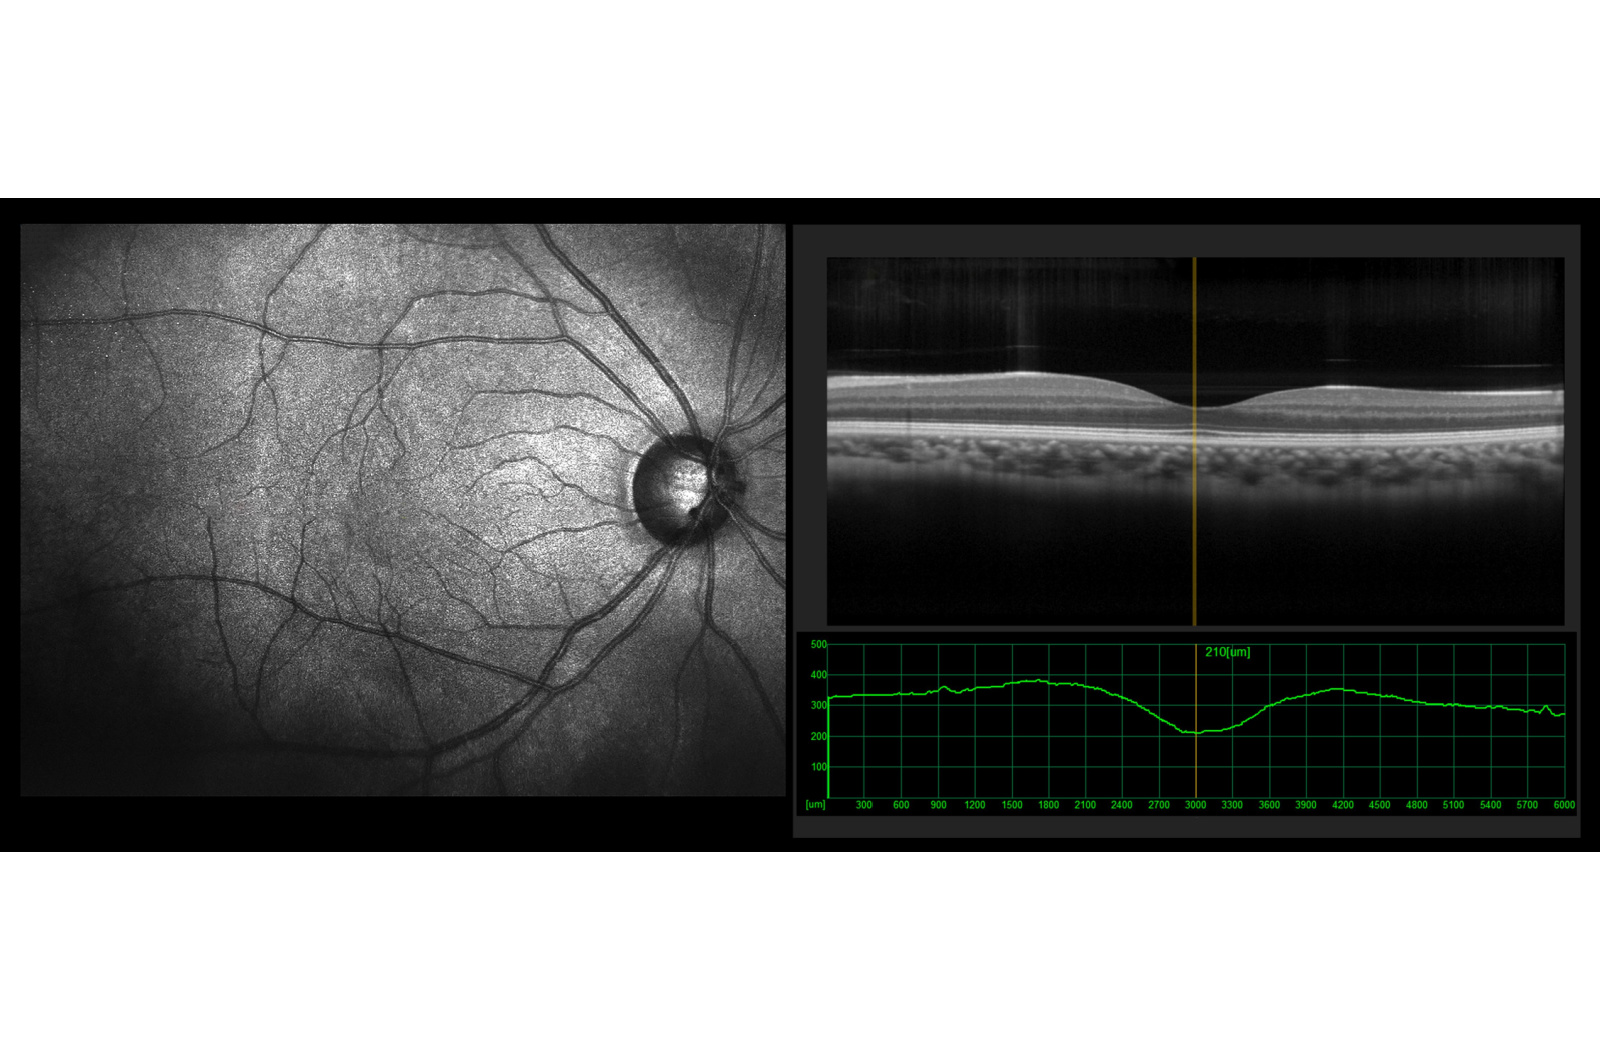 Example OCT scan showing the retina and macula.